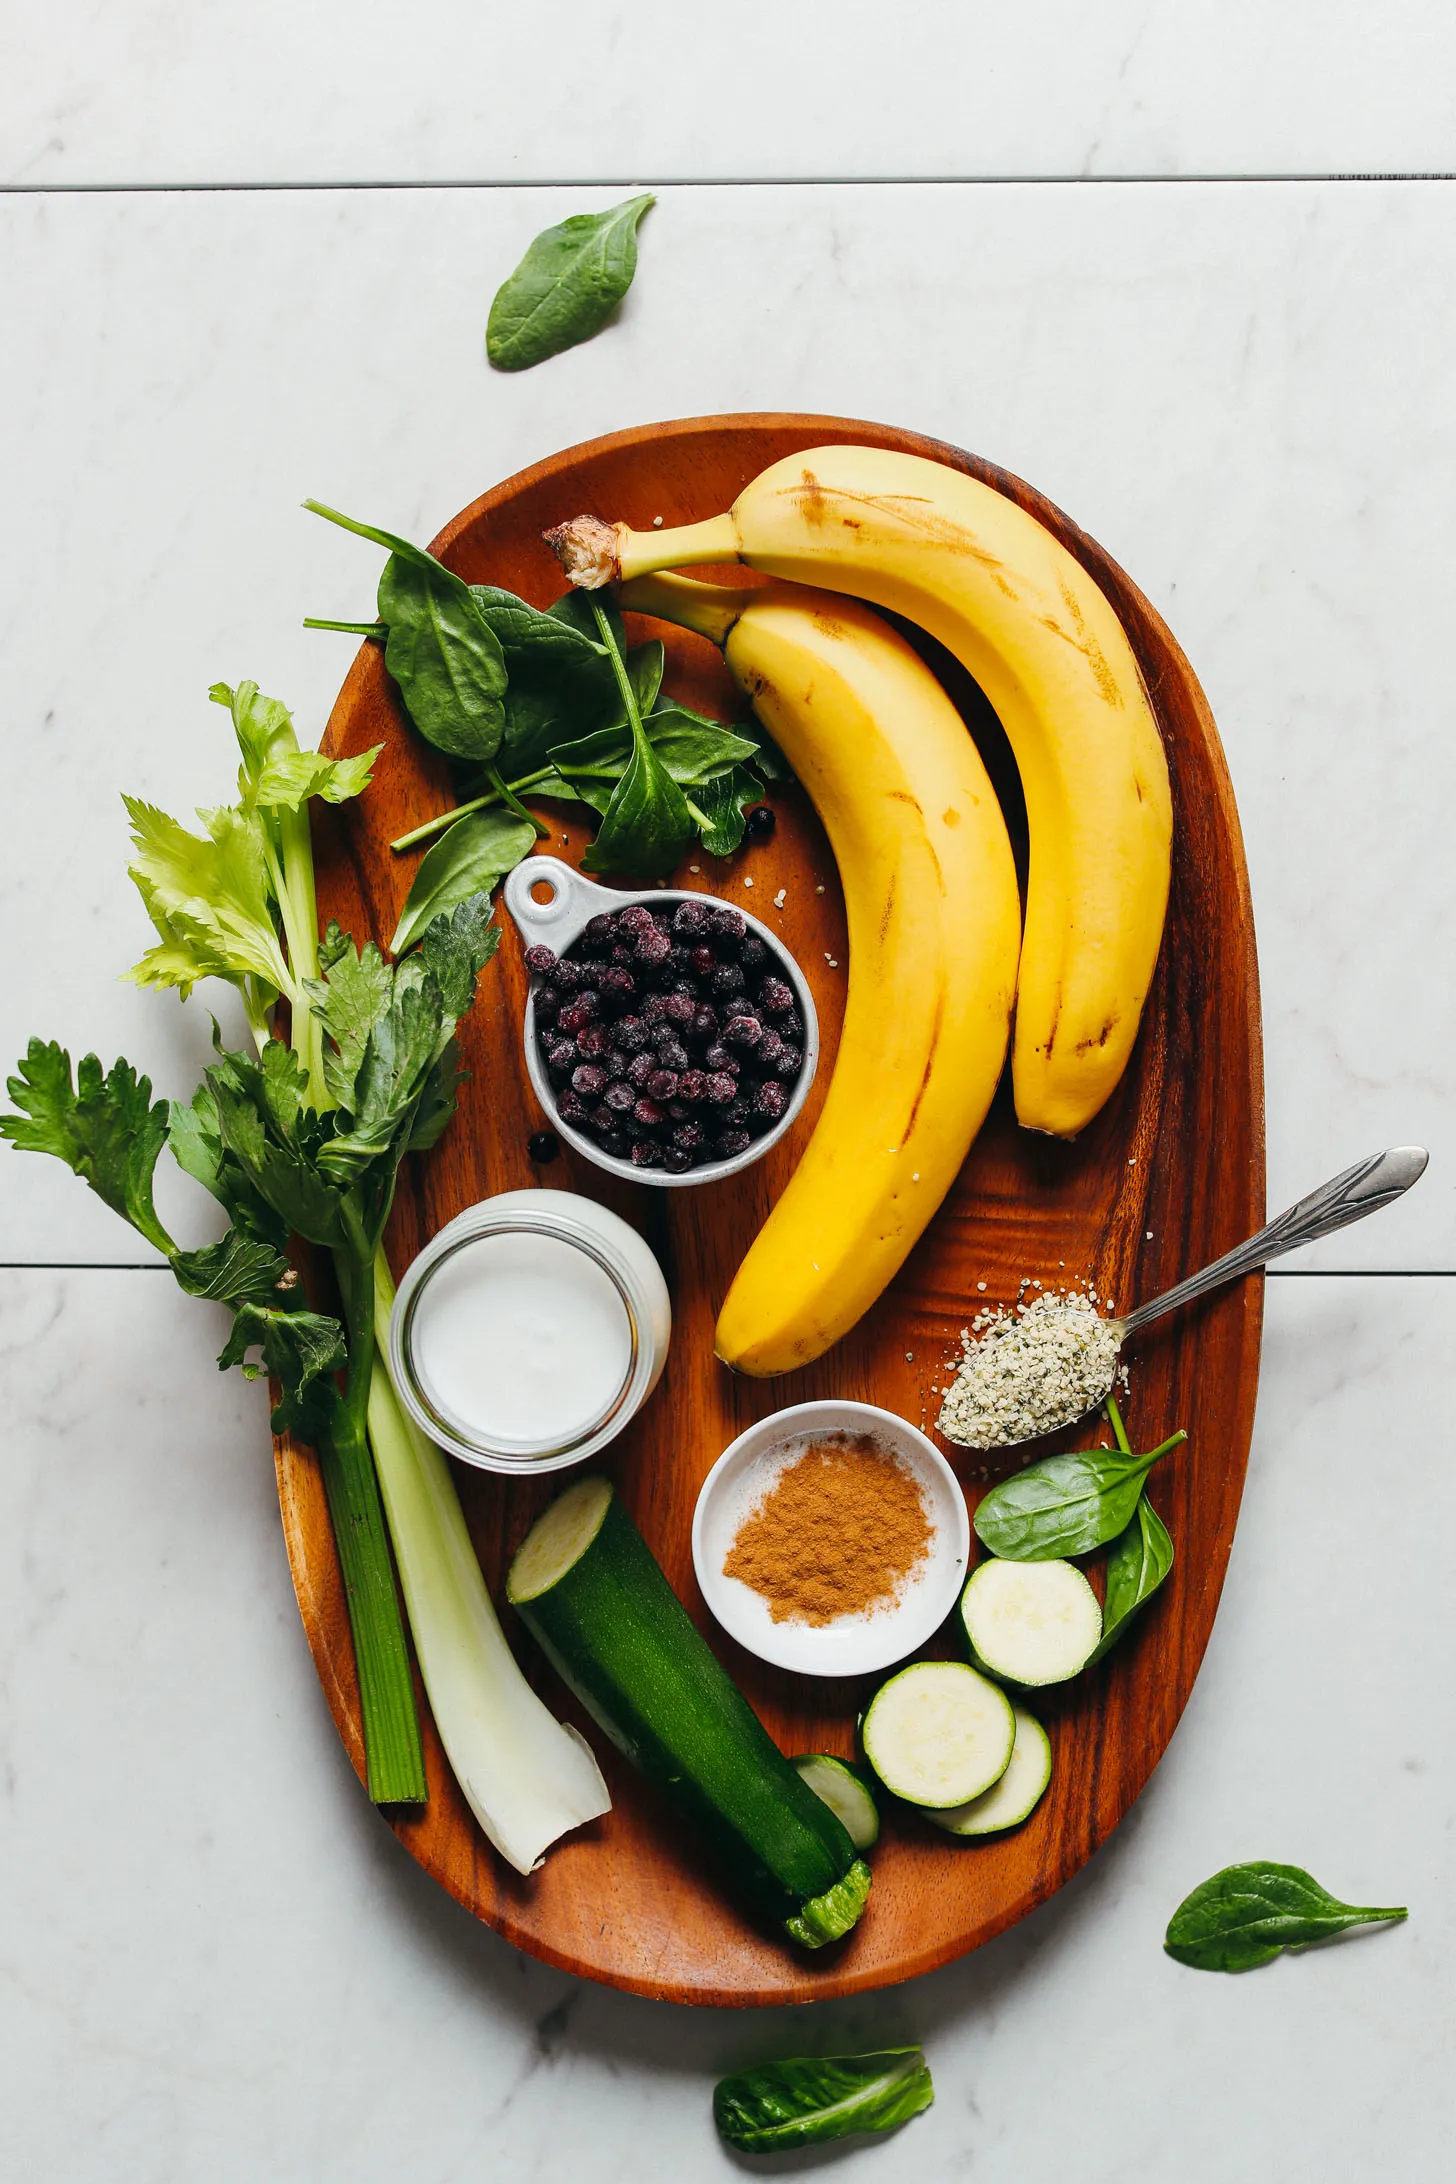 Celery, zucchini, coconut milk, blueberries, spinach, banana, hemp seeds, and cinnamon displayed on a wood platter